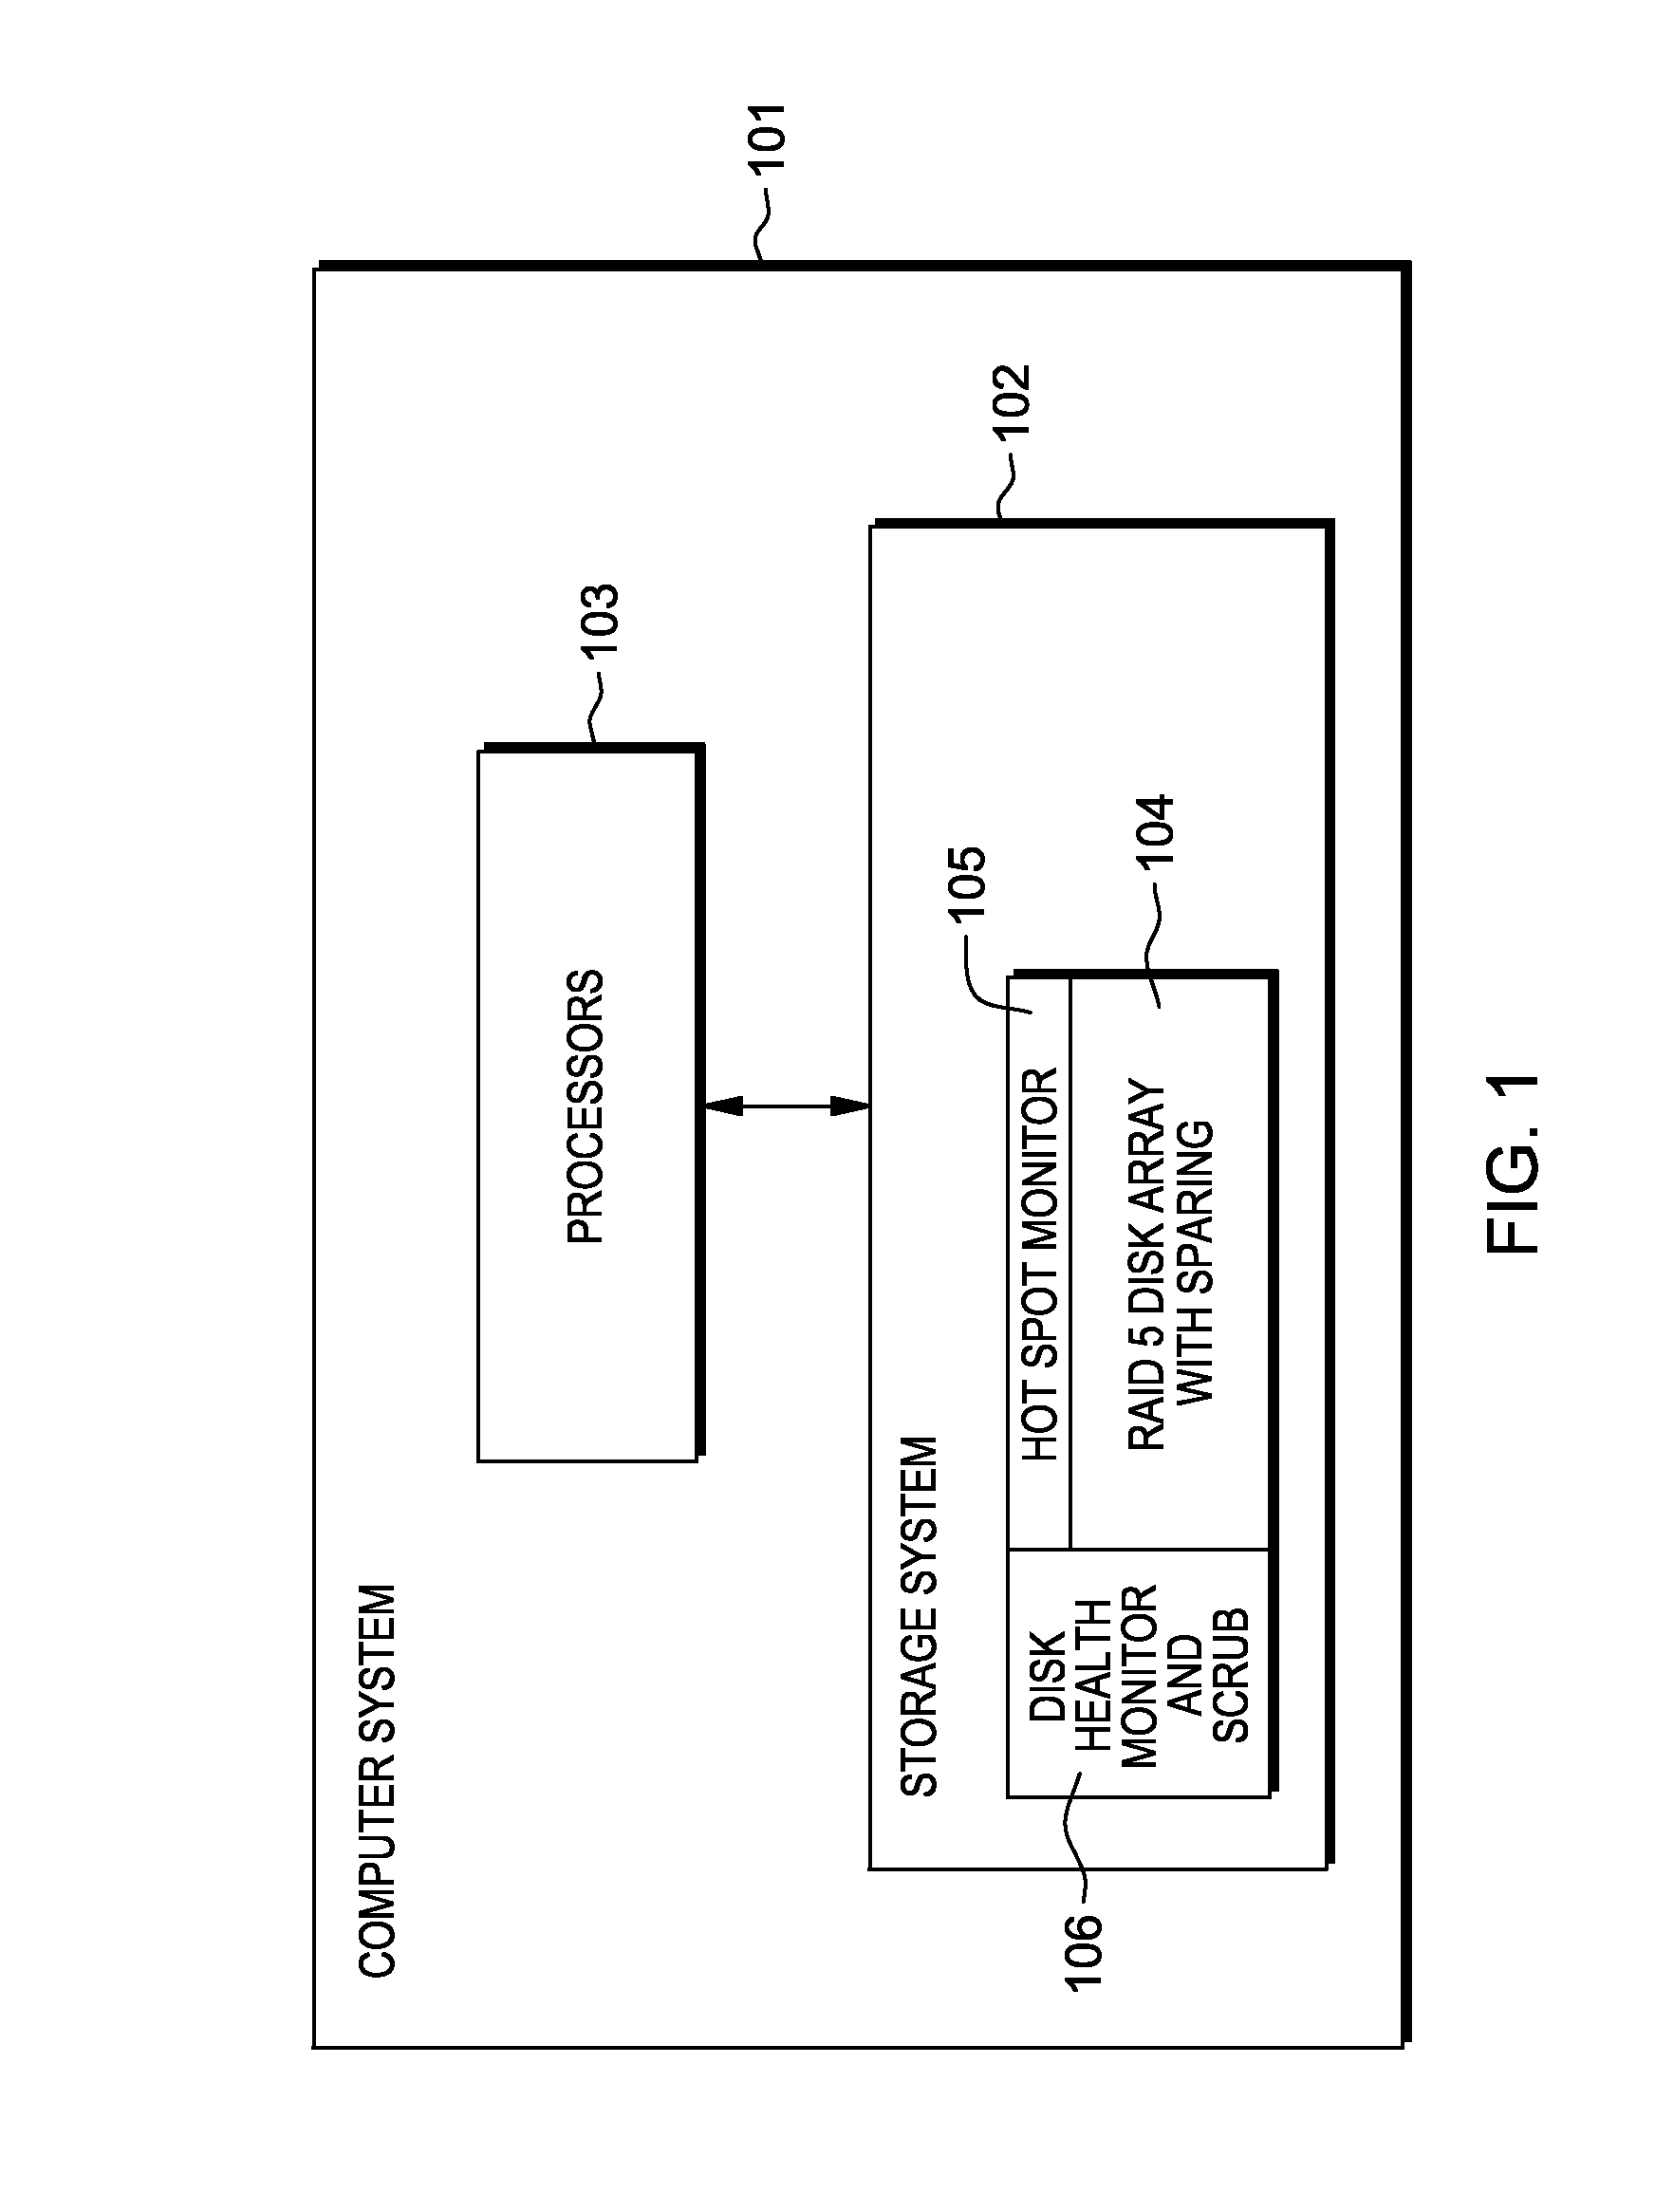 Preventing unrecoverable errors during a disk regeneration in a disk array